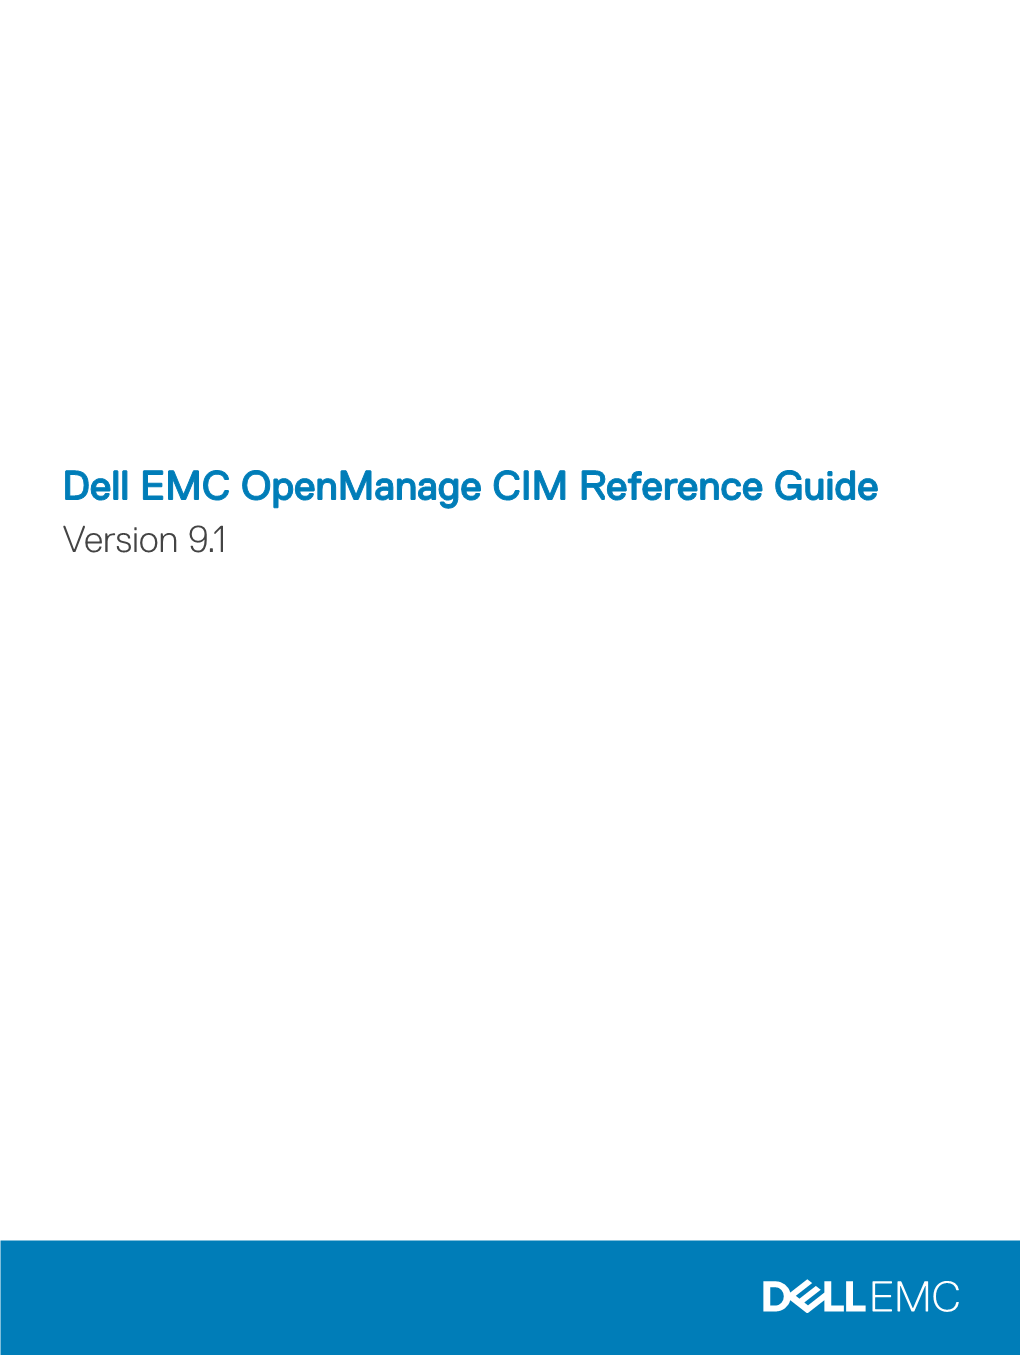 Dell EMC Openmanage CIM Reference Guide Version 9.1 Notes, Cautions, and Warnings